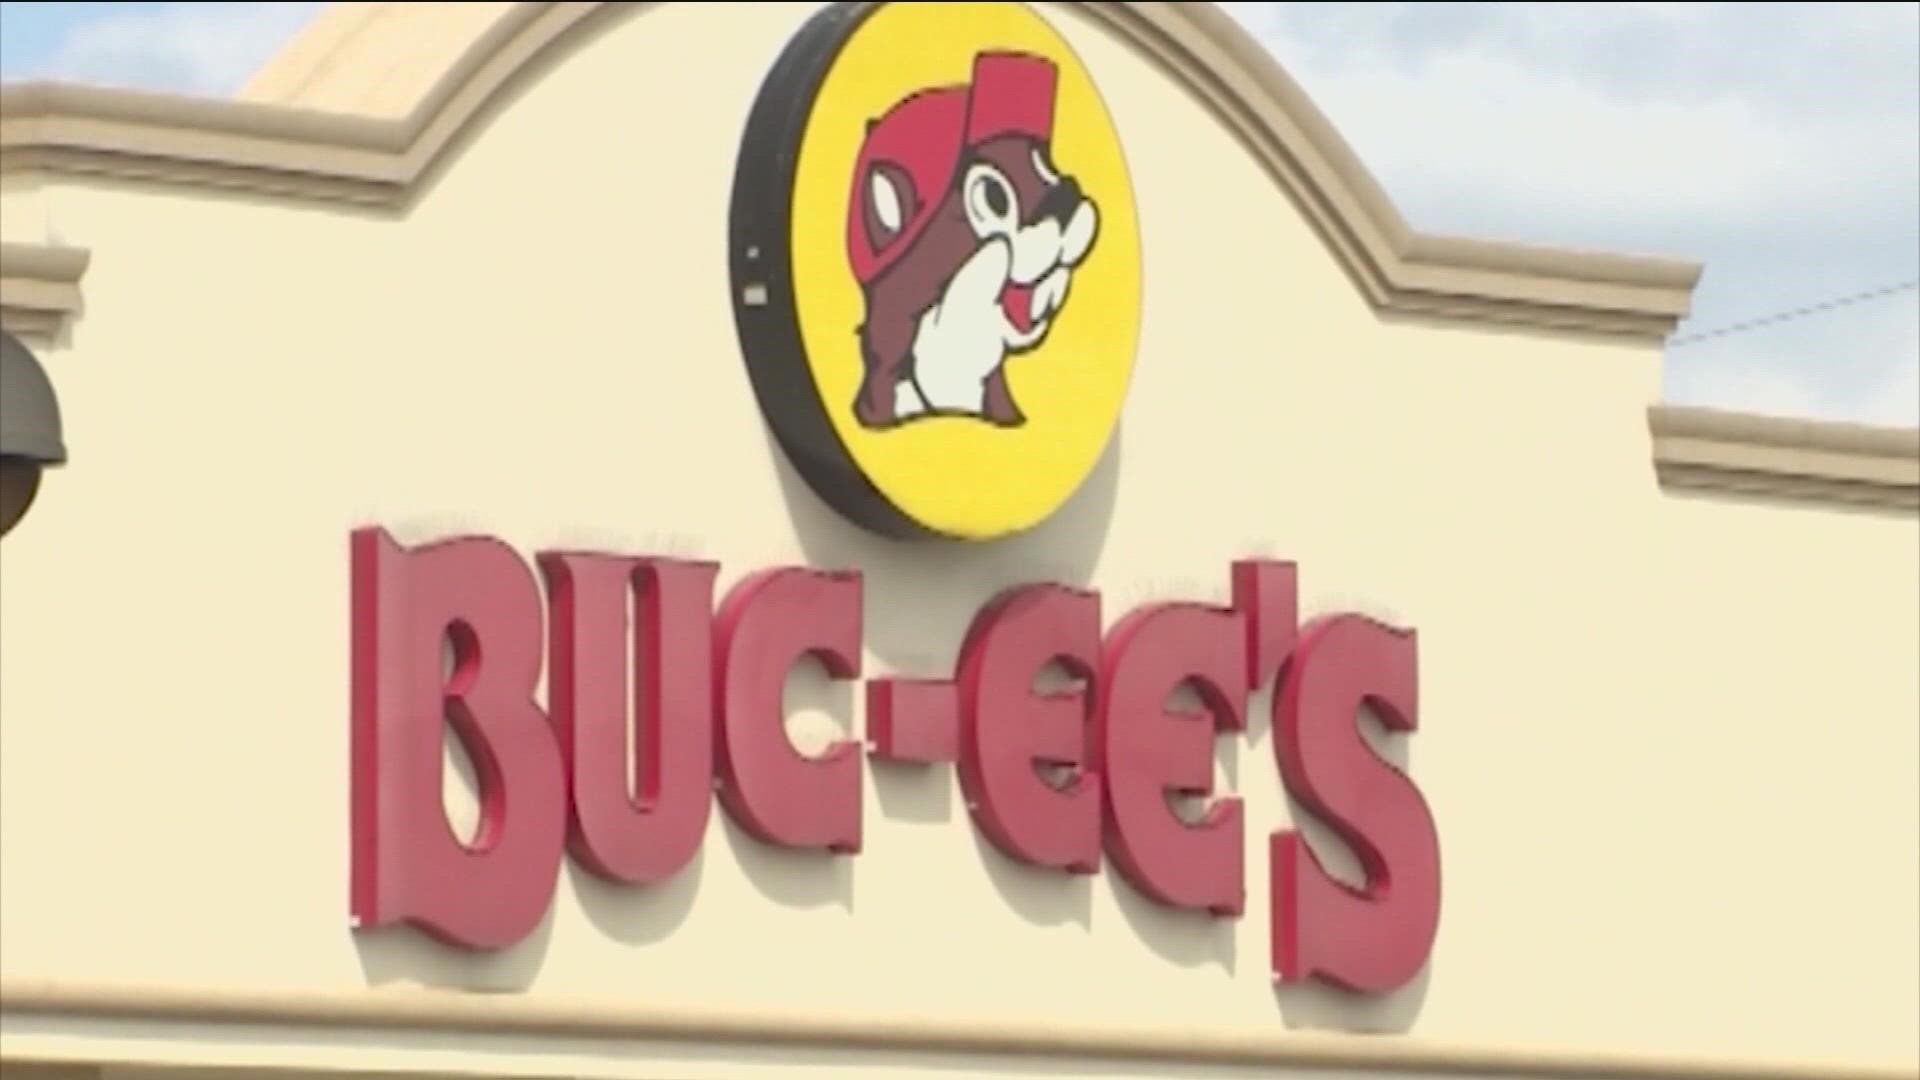 The Luling expansion is set to become the largest Buc-ee's convenience store.